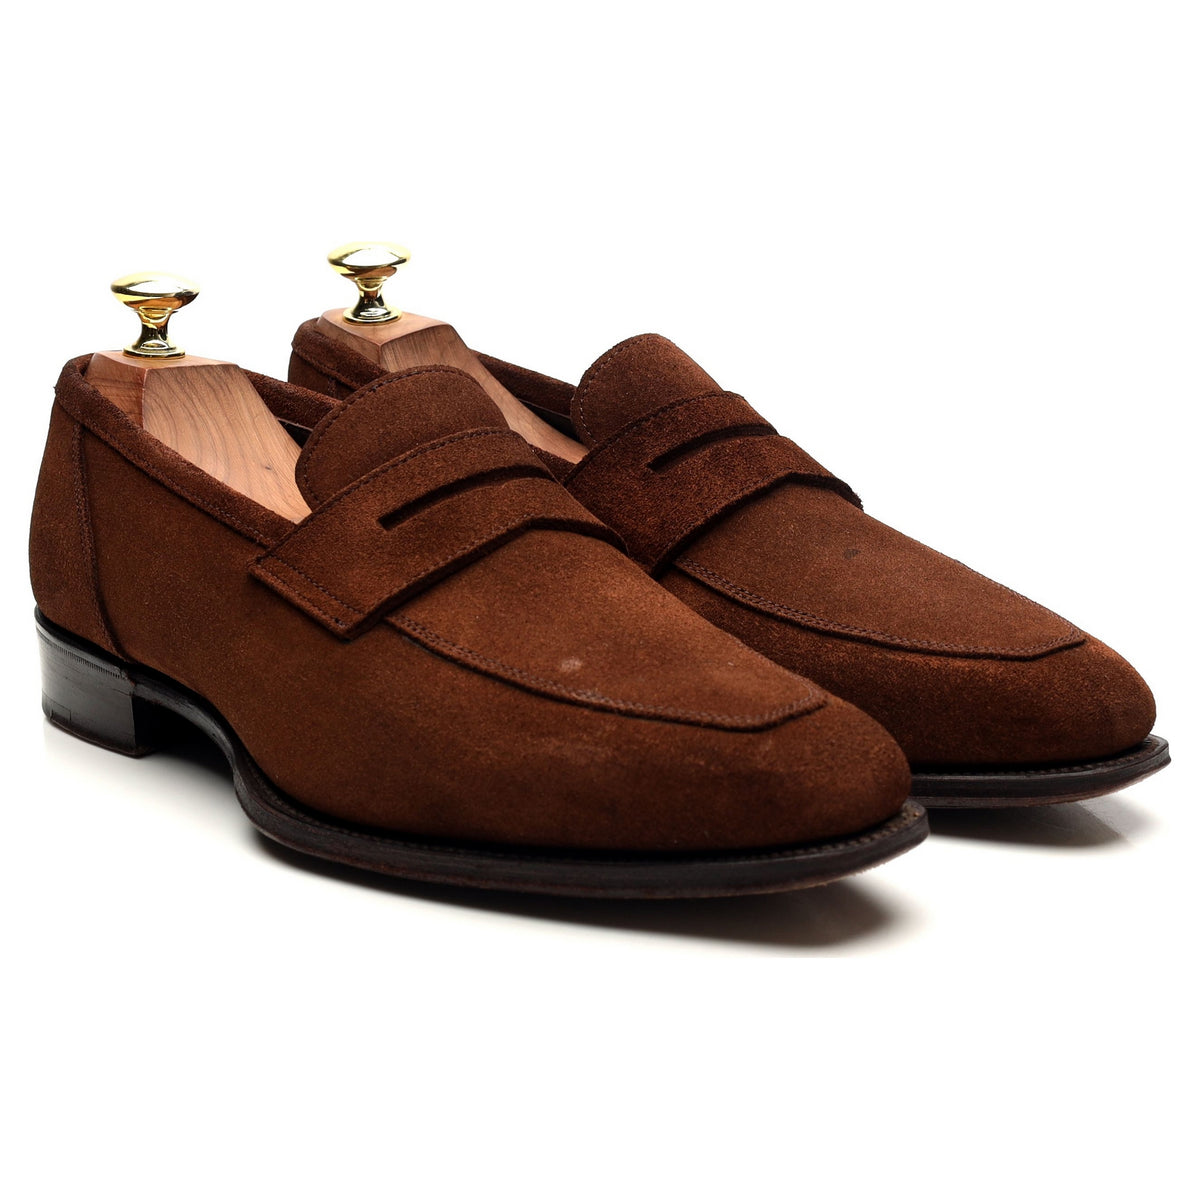 Brown Suede Loafers UK 7 E